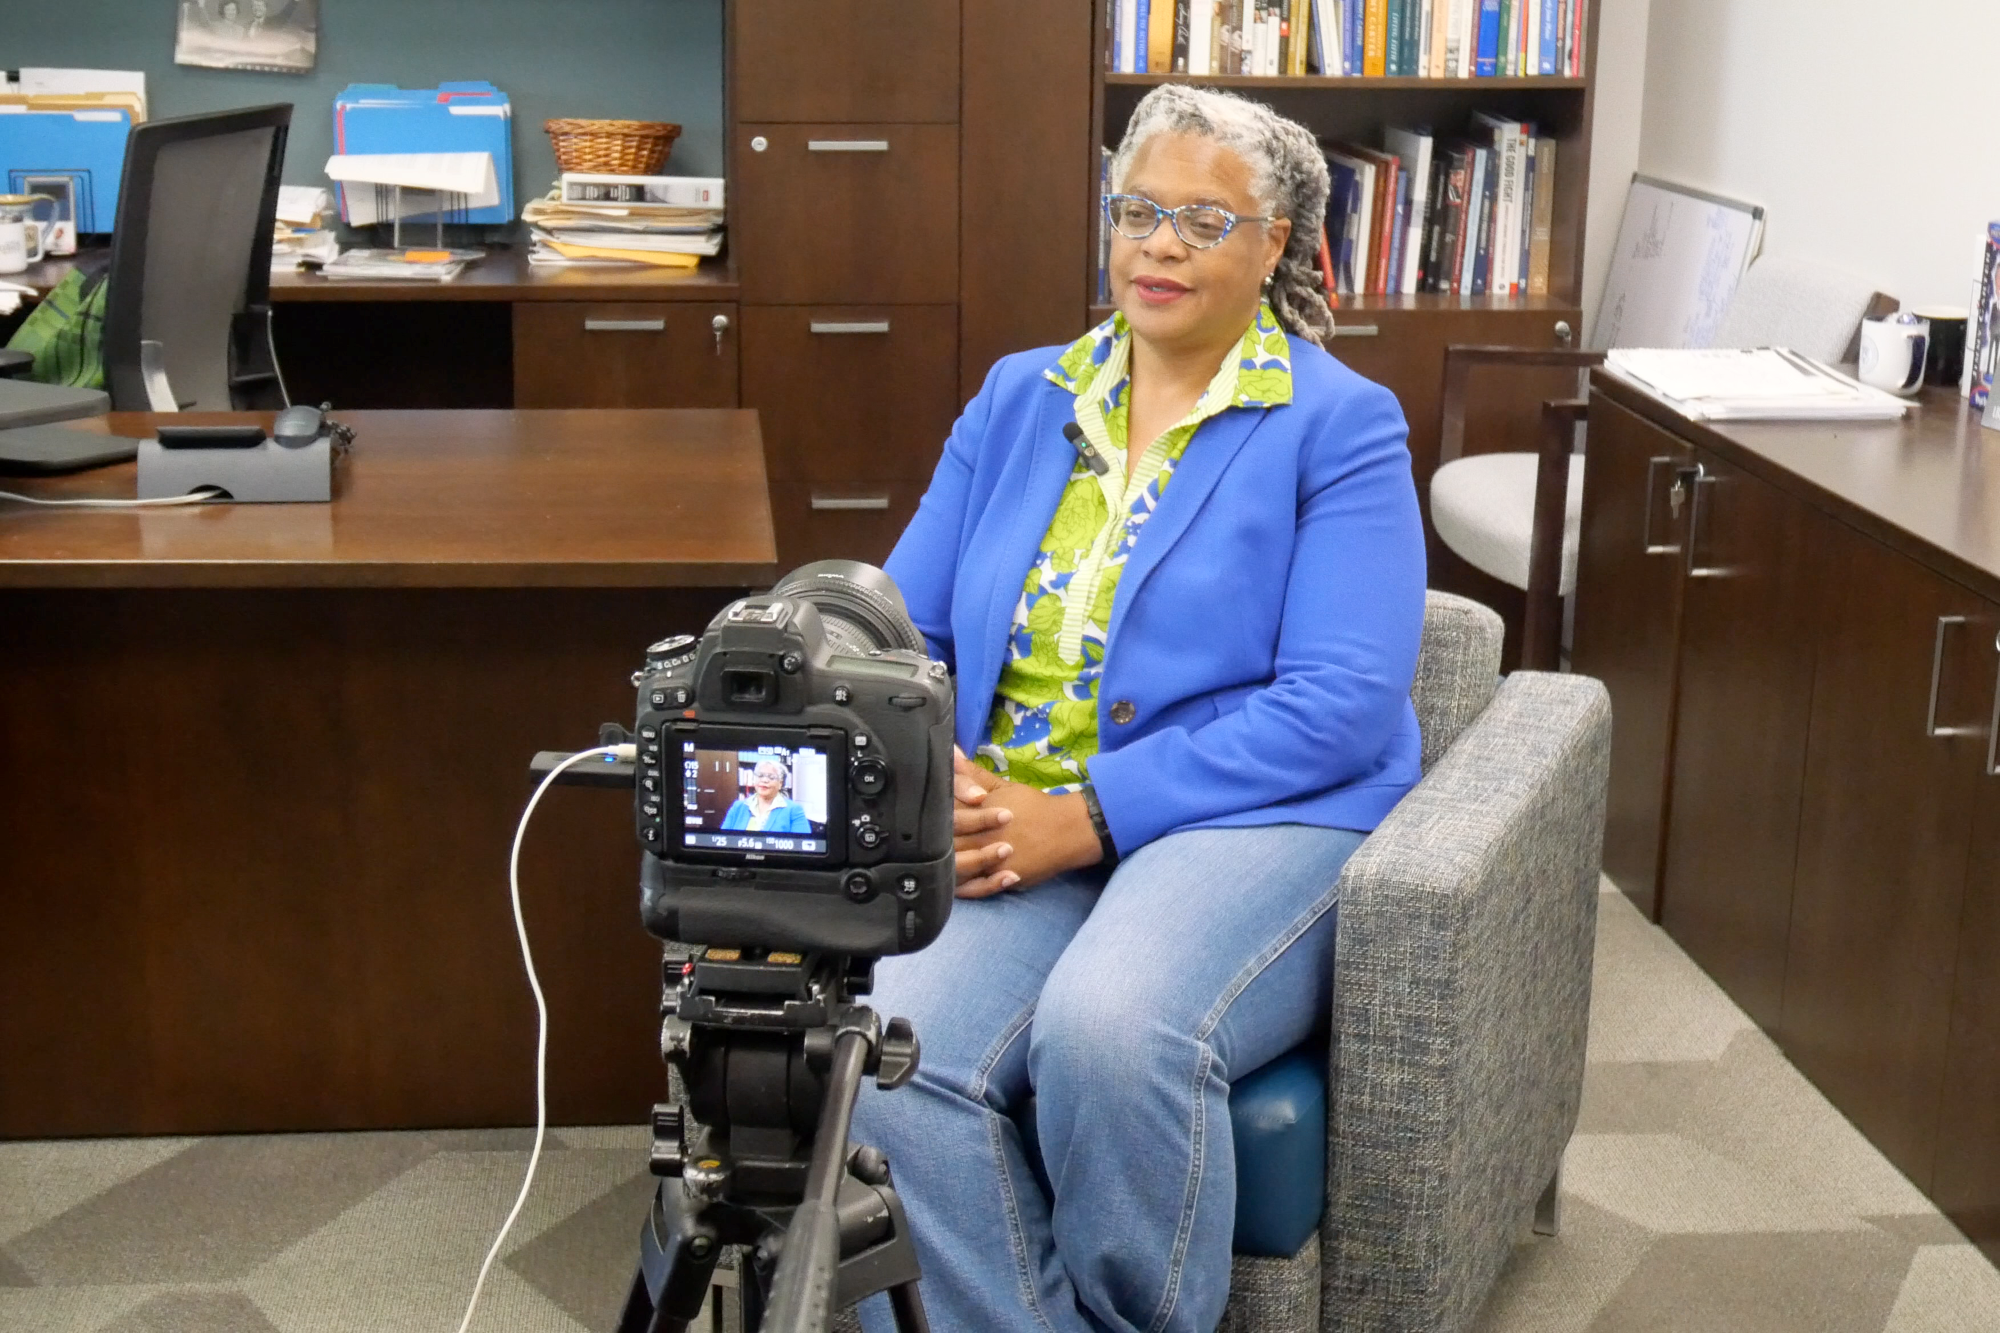 Behind the scenes with Dr. Meredith Evans, Director of the Jimmy Carter Presidential Library and Museum.